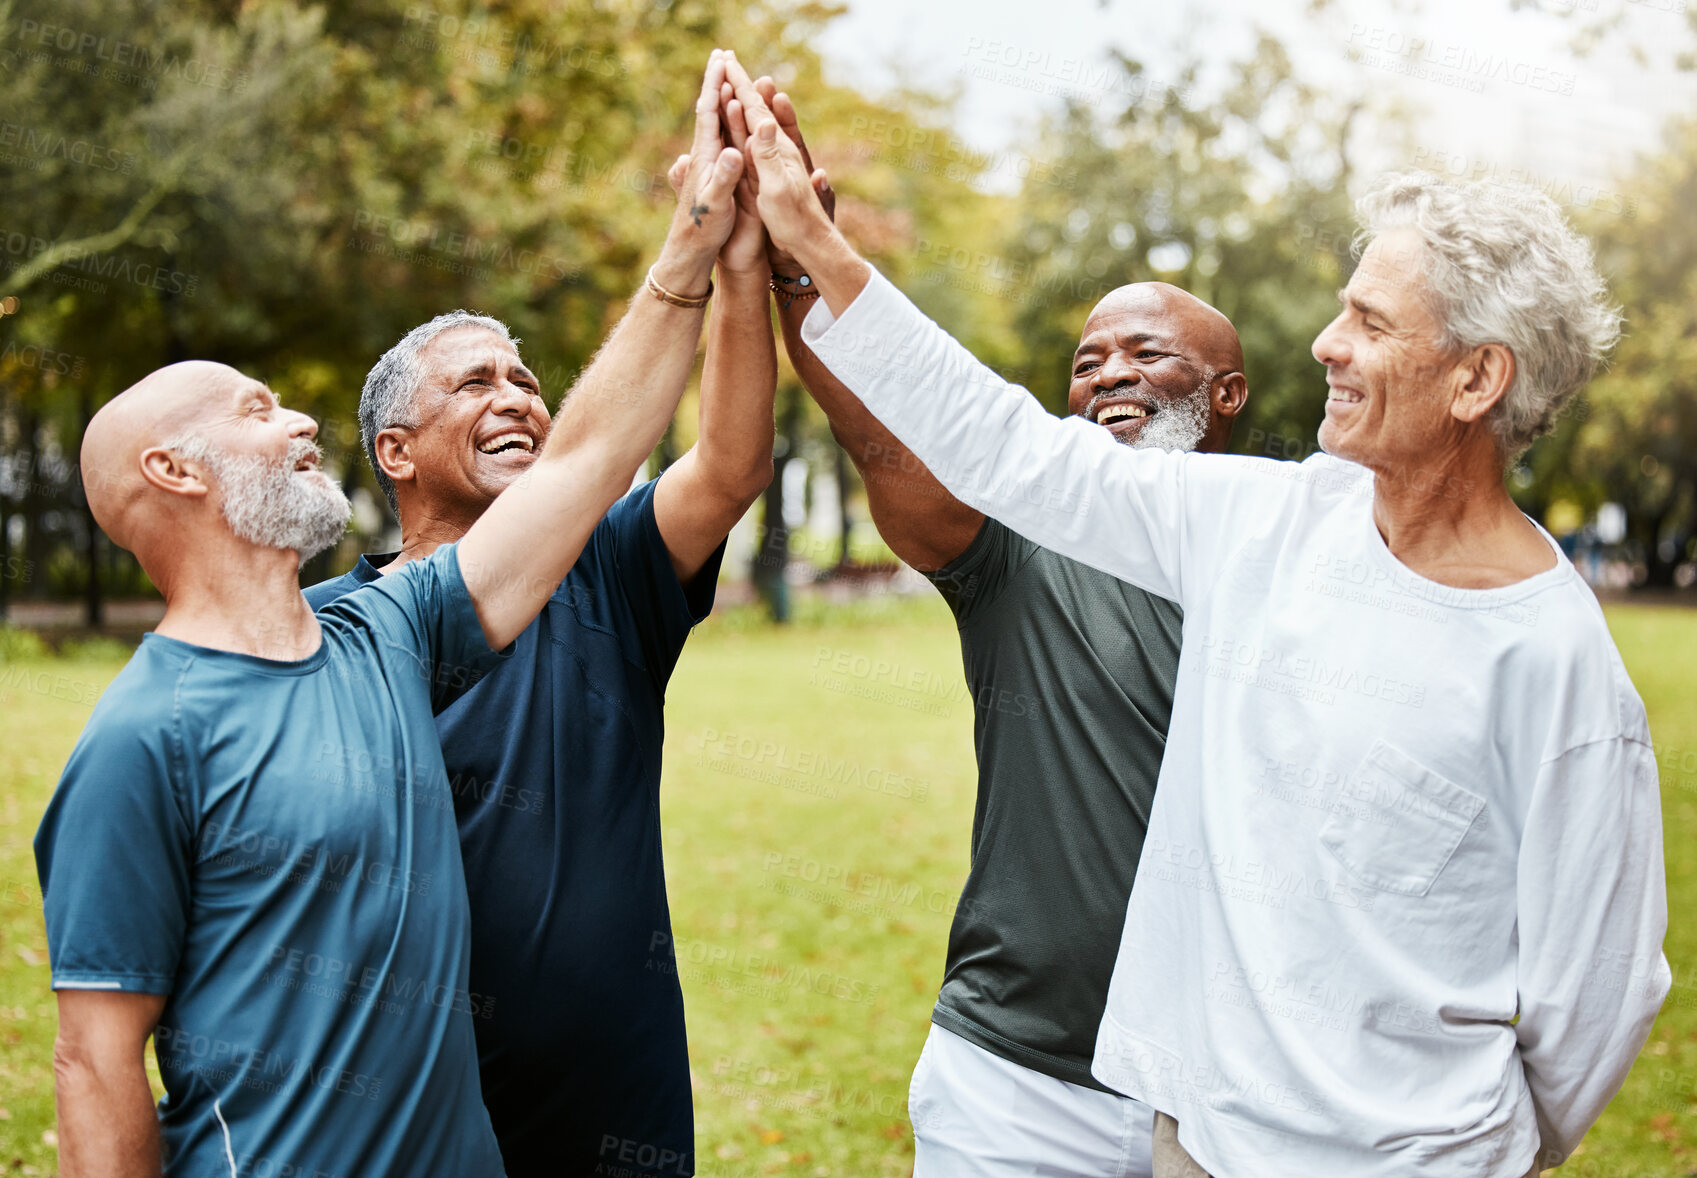 Buy stock photo High five, fitness and senior men friends in park for teamwork, exercise target and workout mission together with community support. Elderly group of people with outdoor wellness success hands sign